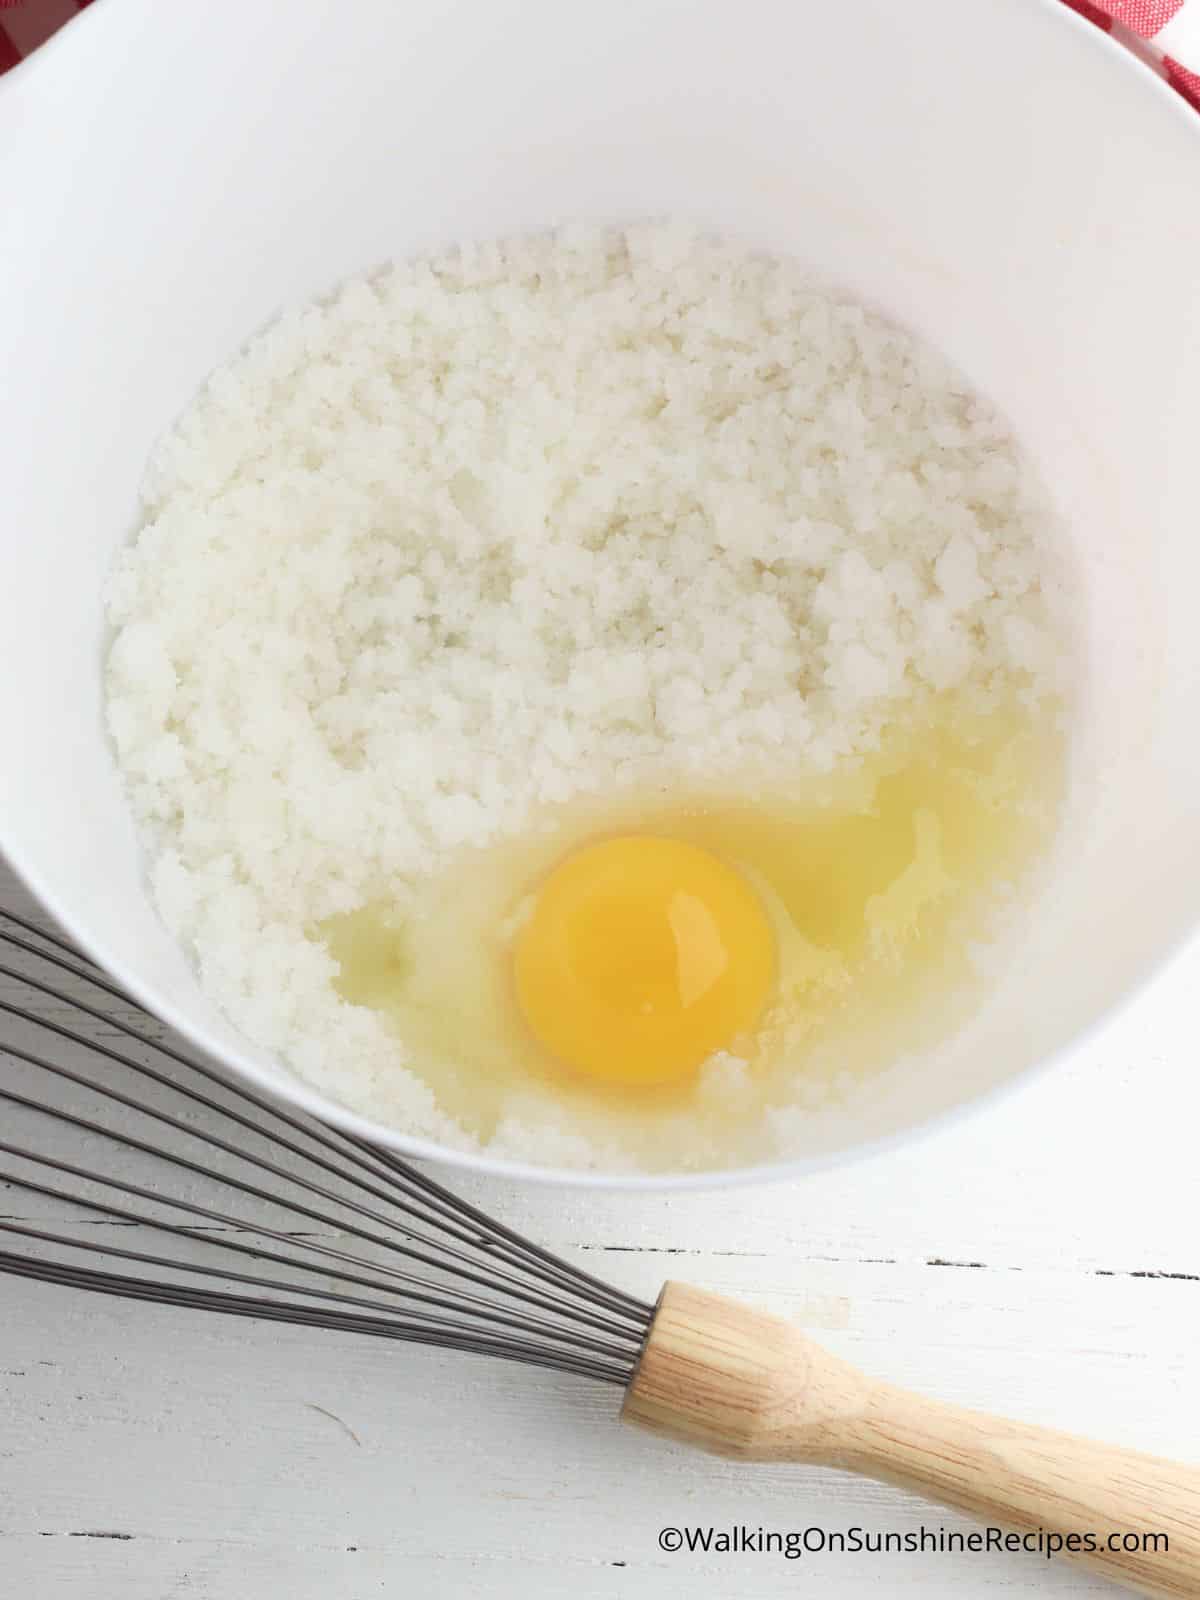 Add eggs to sugar mixture with peppermint extract.